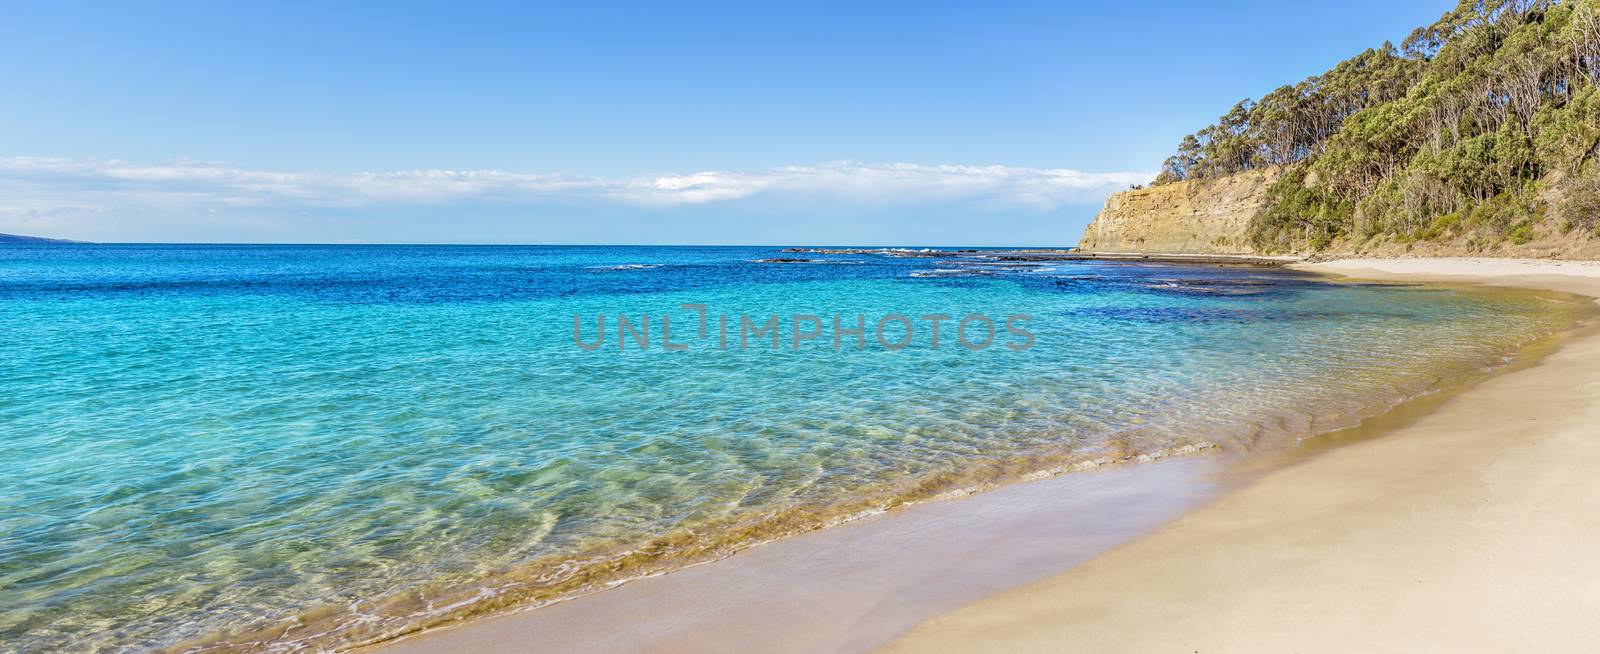 Beautiful blue waters of Depot Beach on the south coast of Australia